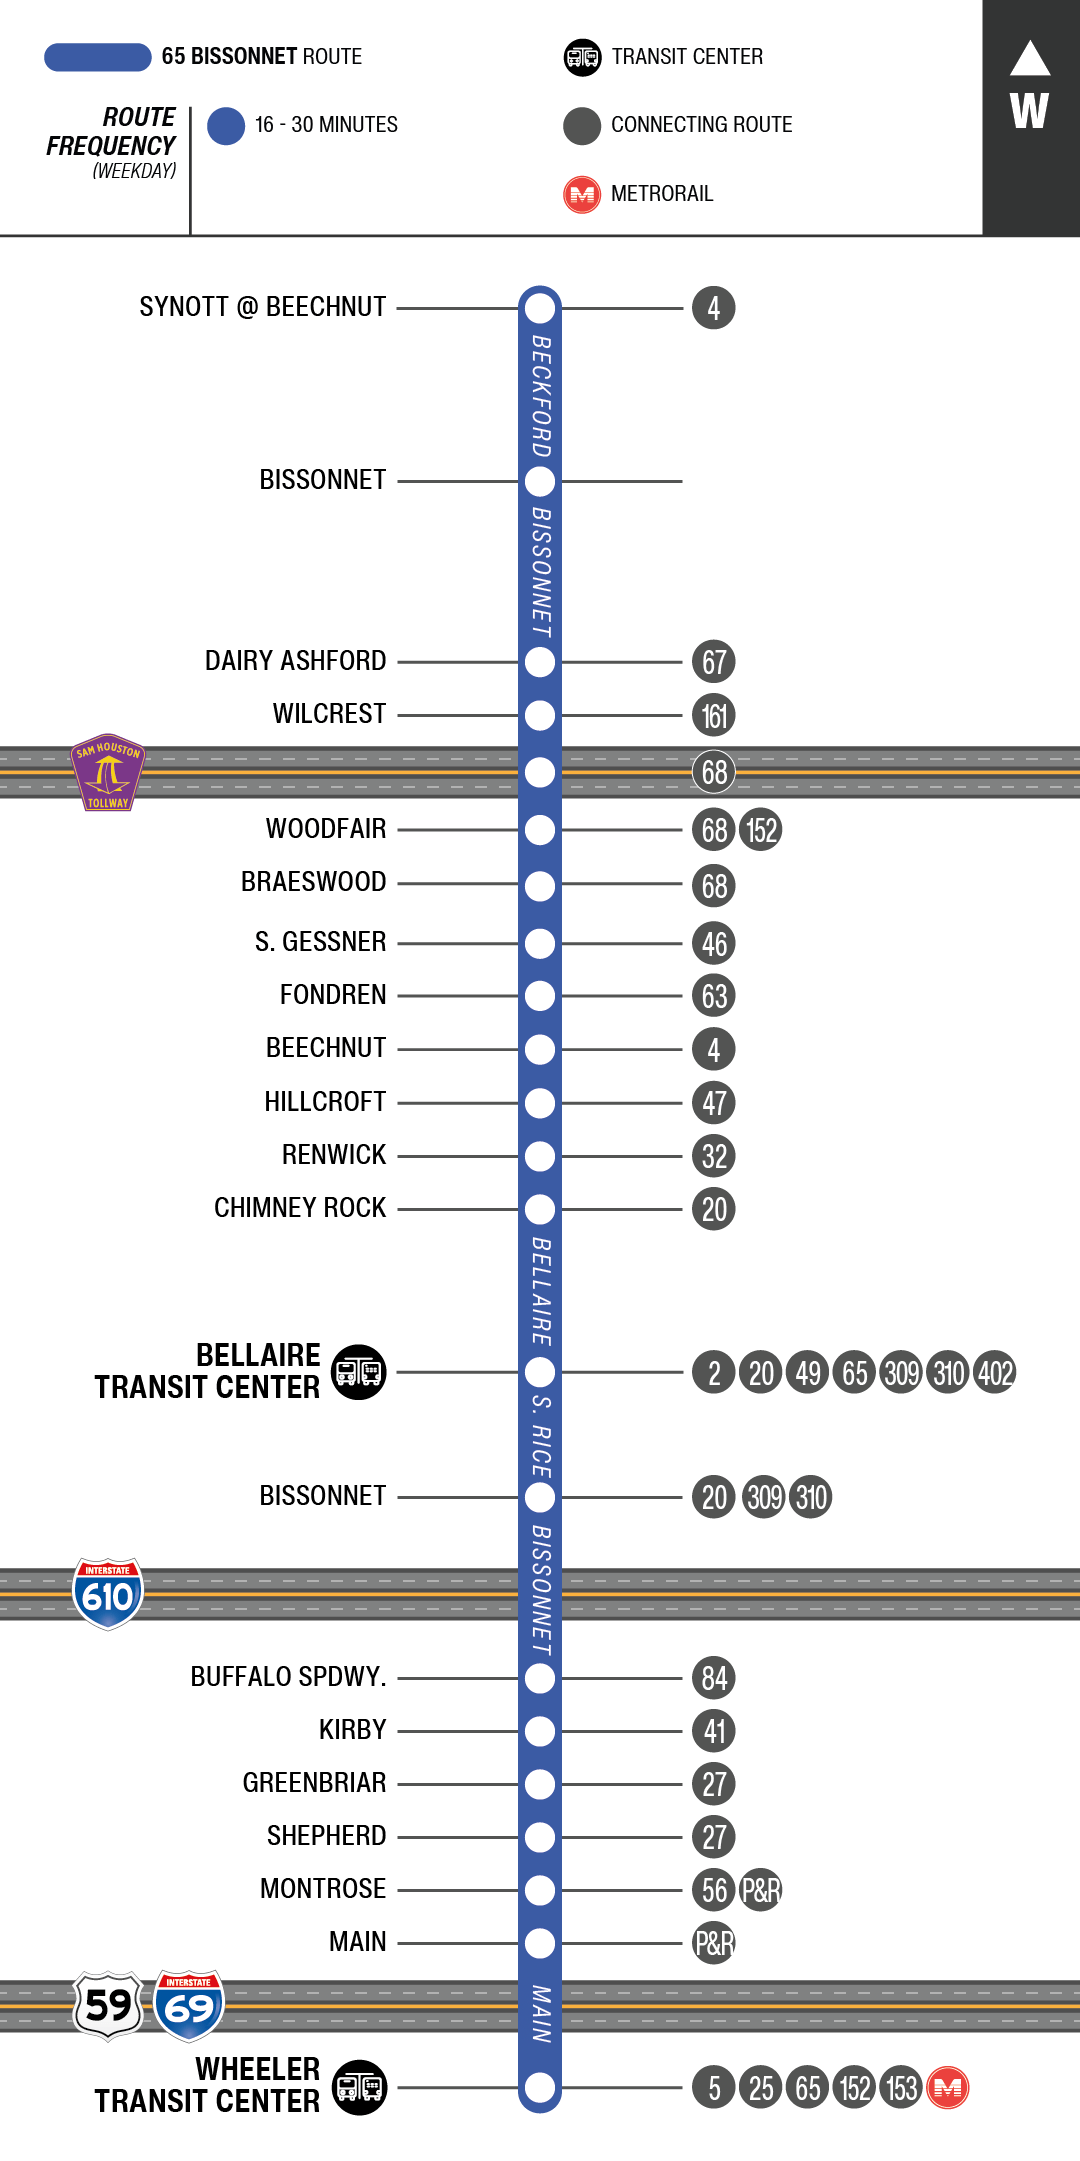 Route map for 65 Bissonnet bus